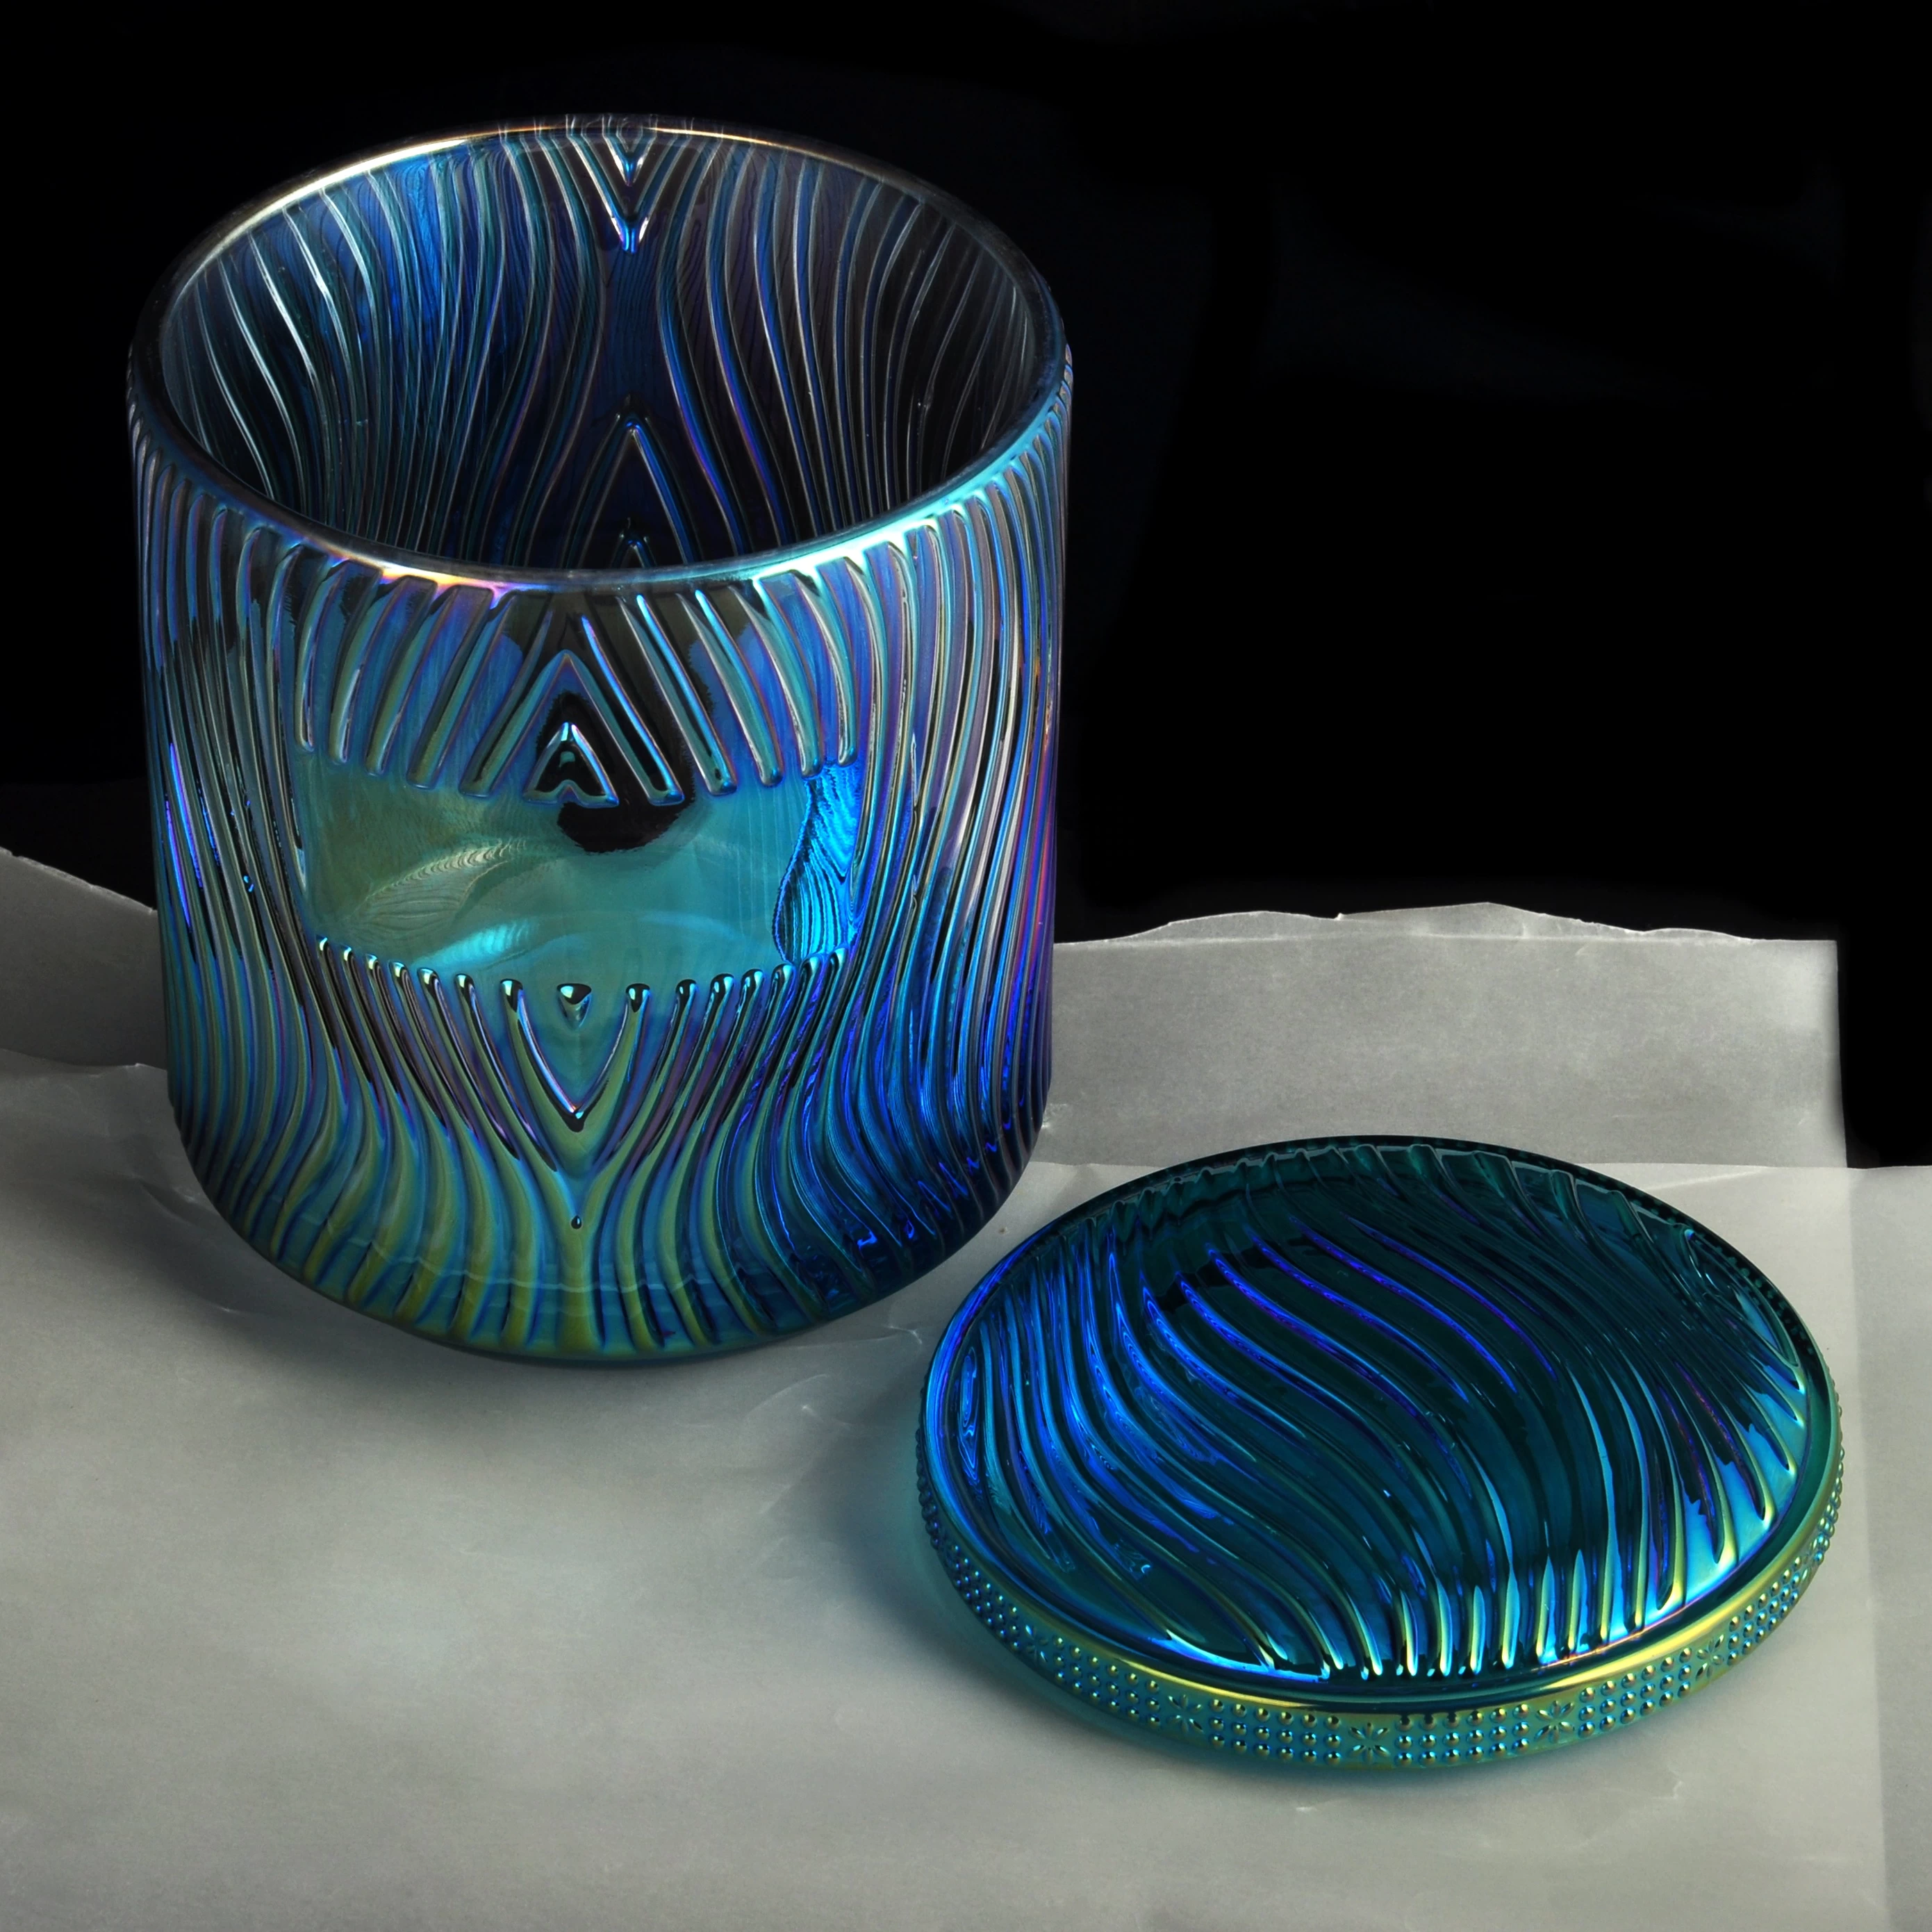 iridescent glass candle jar with glass lid, unique colorful glass candle vessel